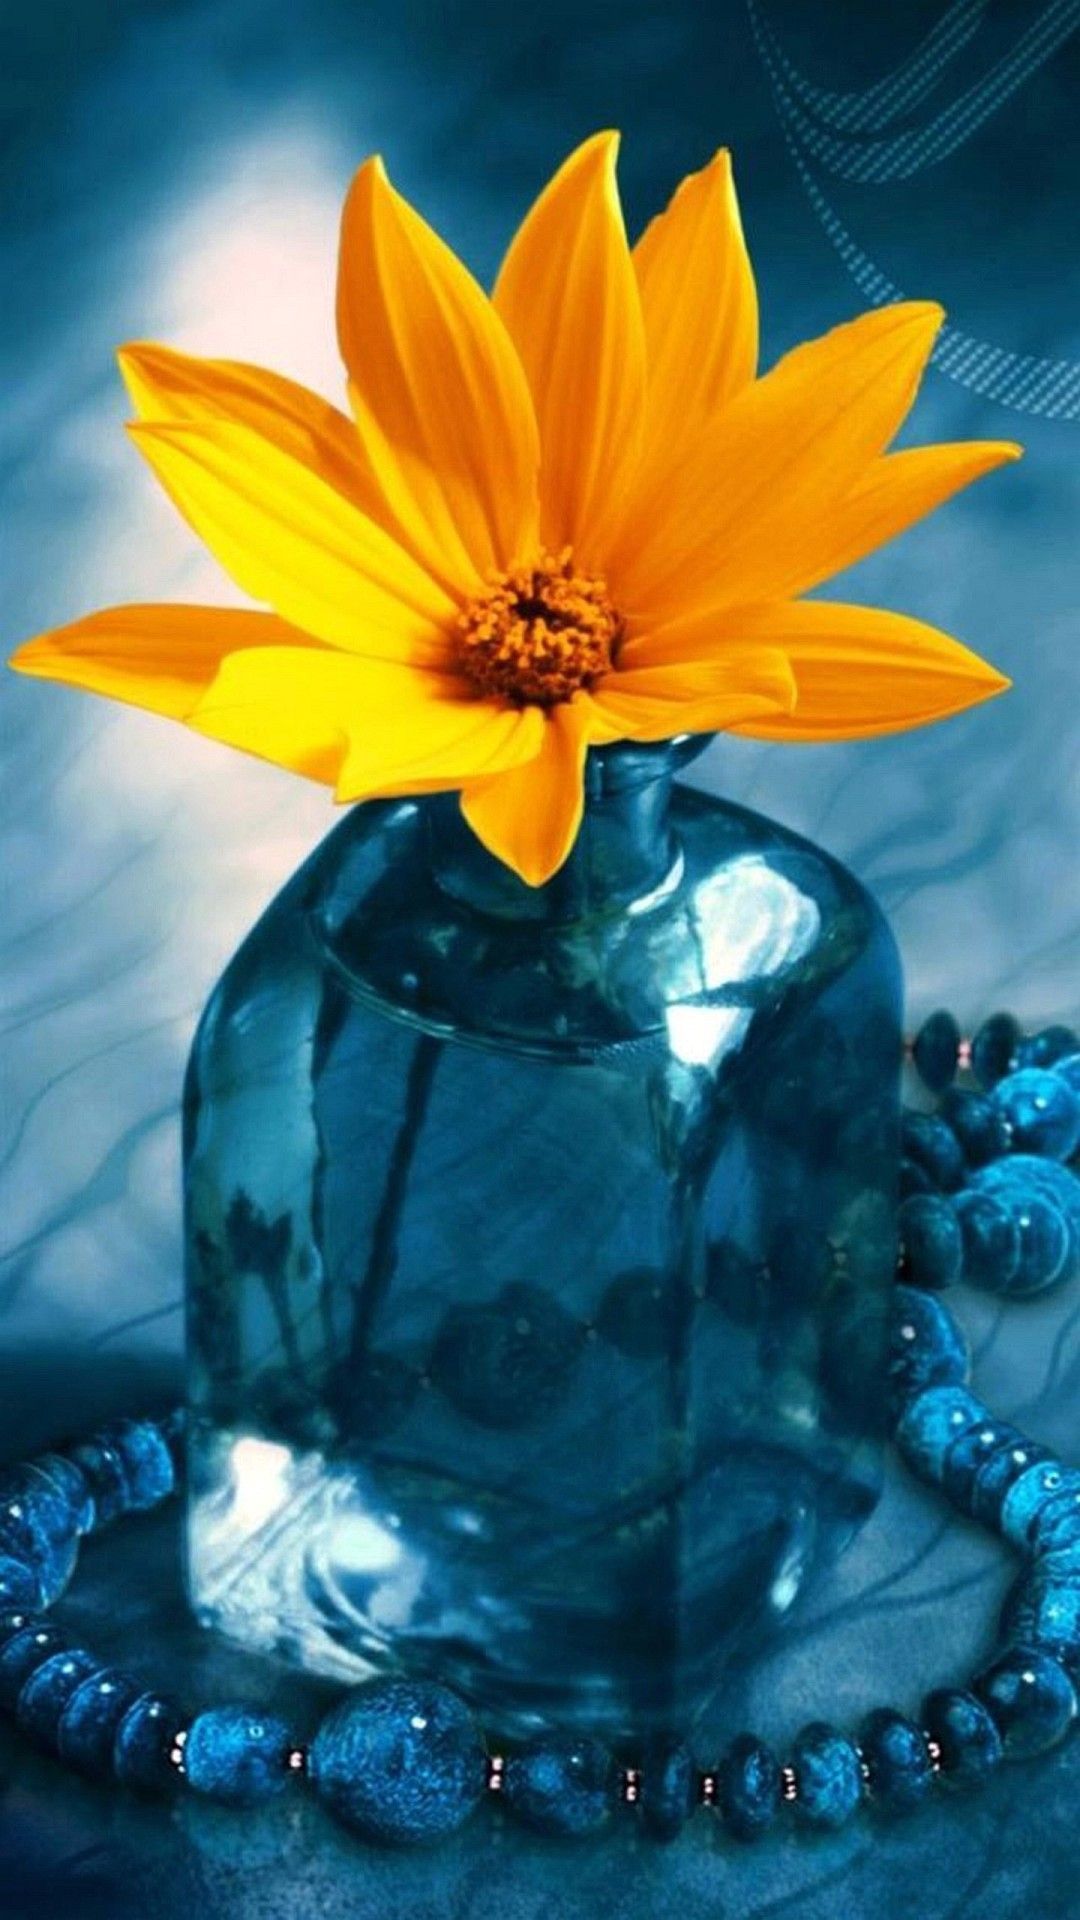 Wallpaper Iphone 6 Plus Yellow Flower 5 5 Inches - 1080 x 1920 ...